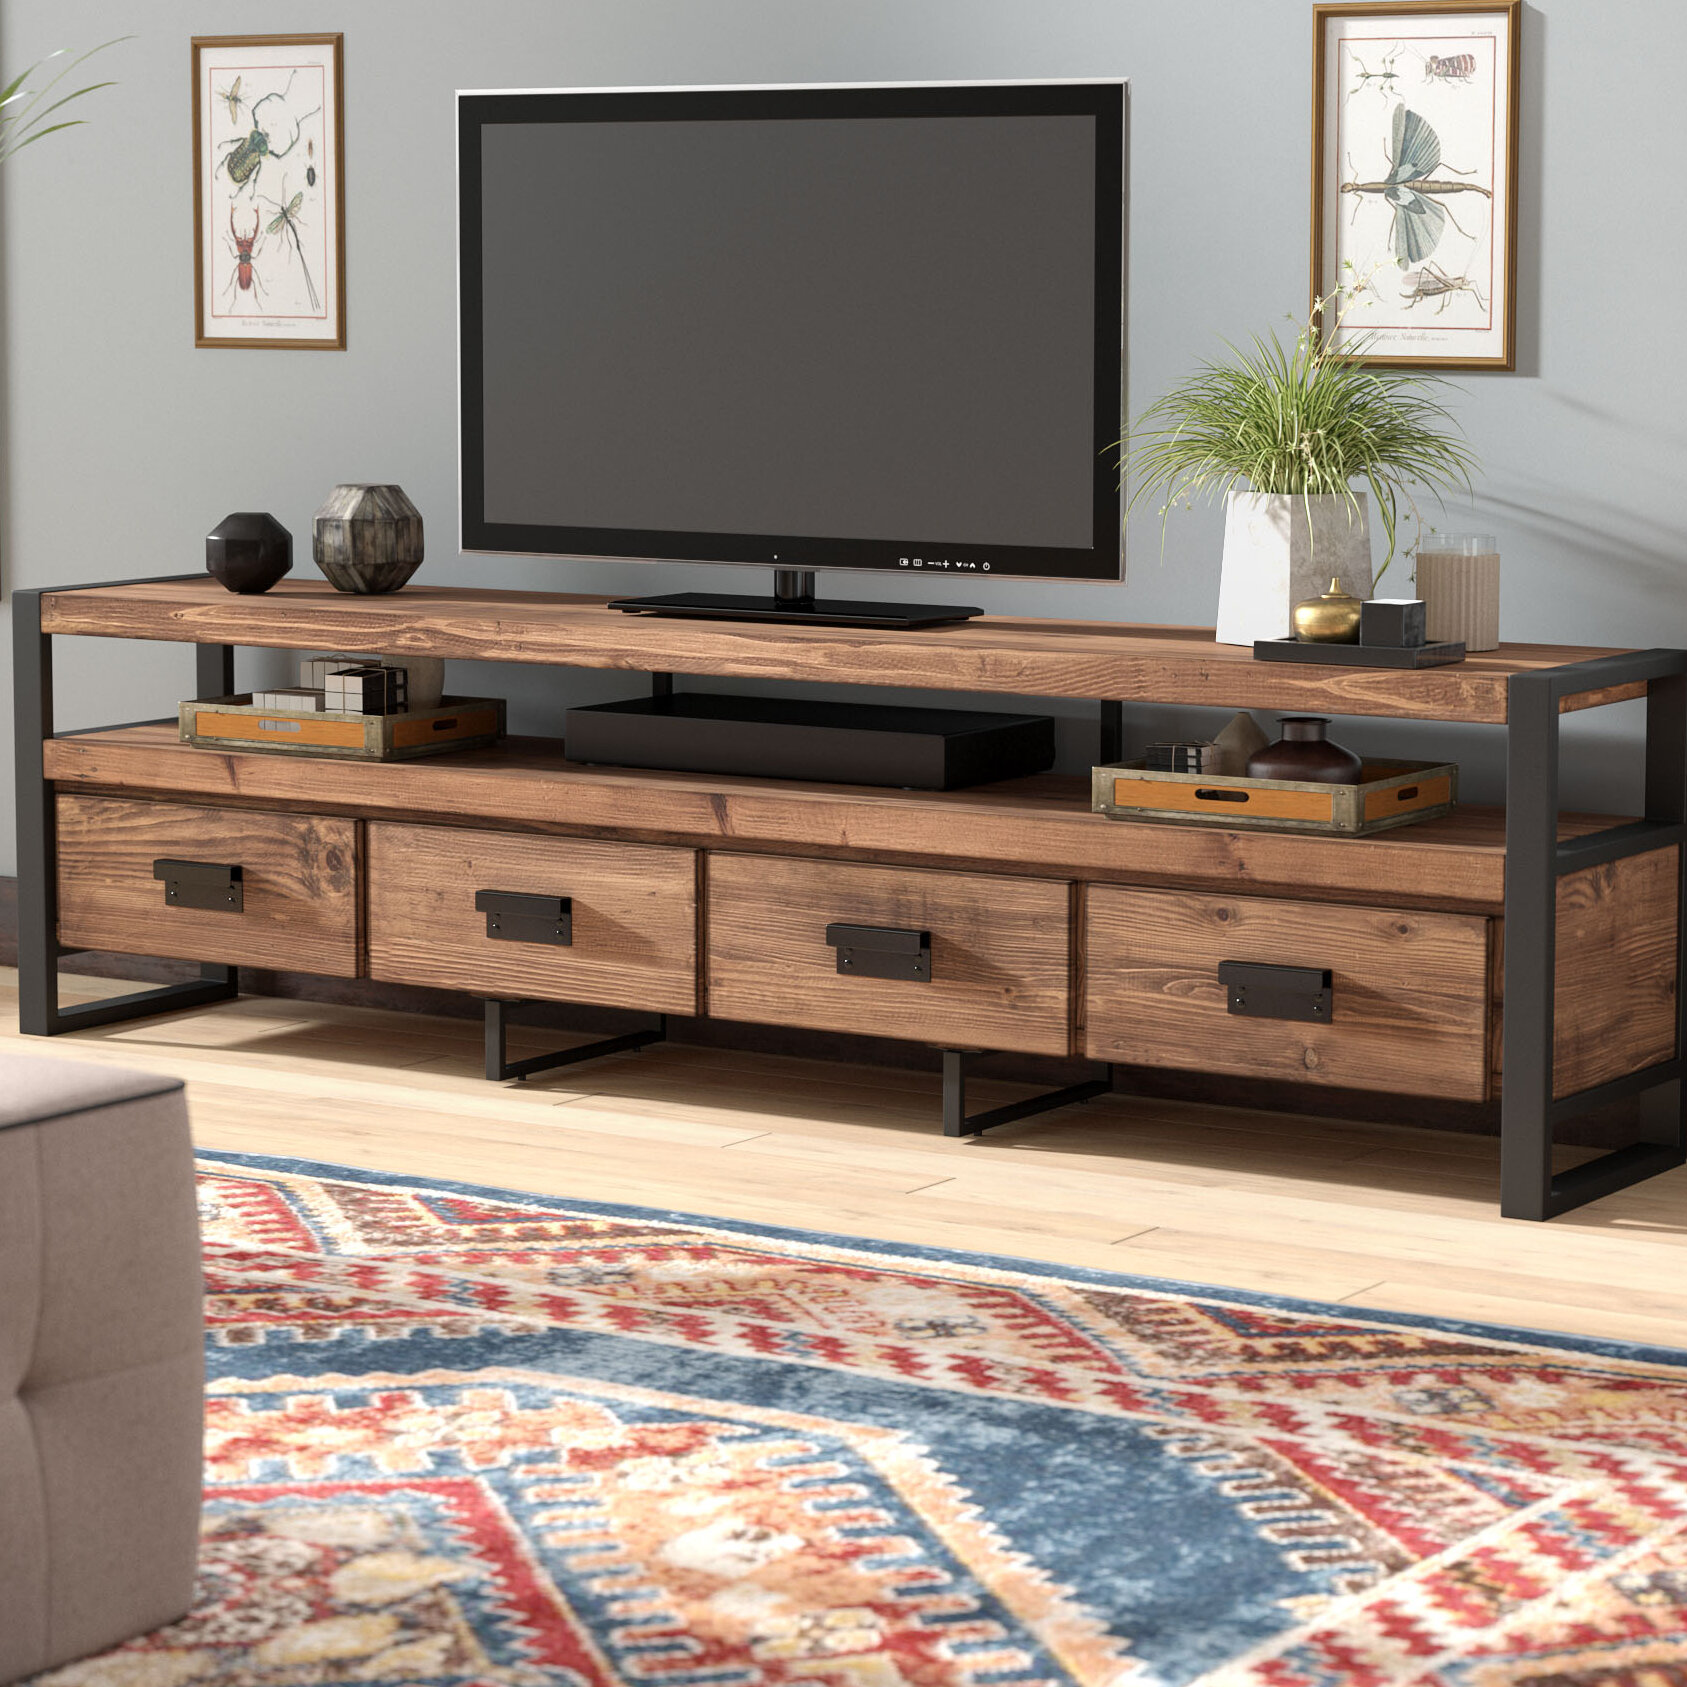 Union Rustic Kylee Solid Wood Tv Stand For Tvs Up To 94 Reviews